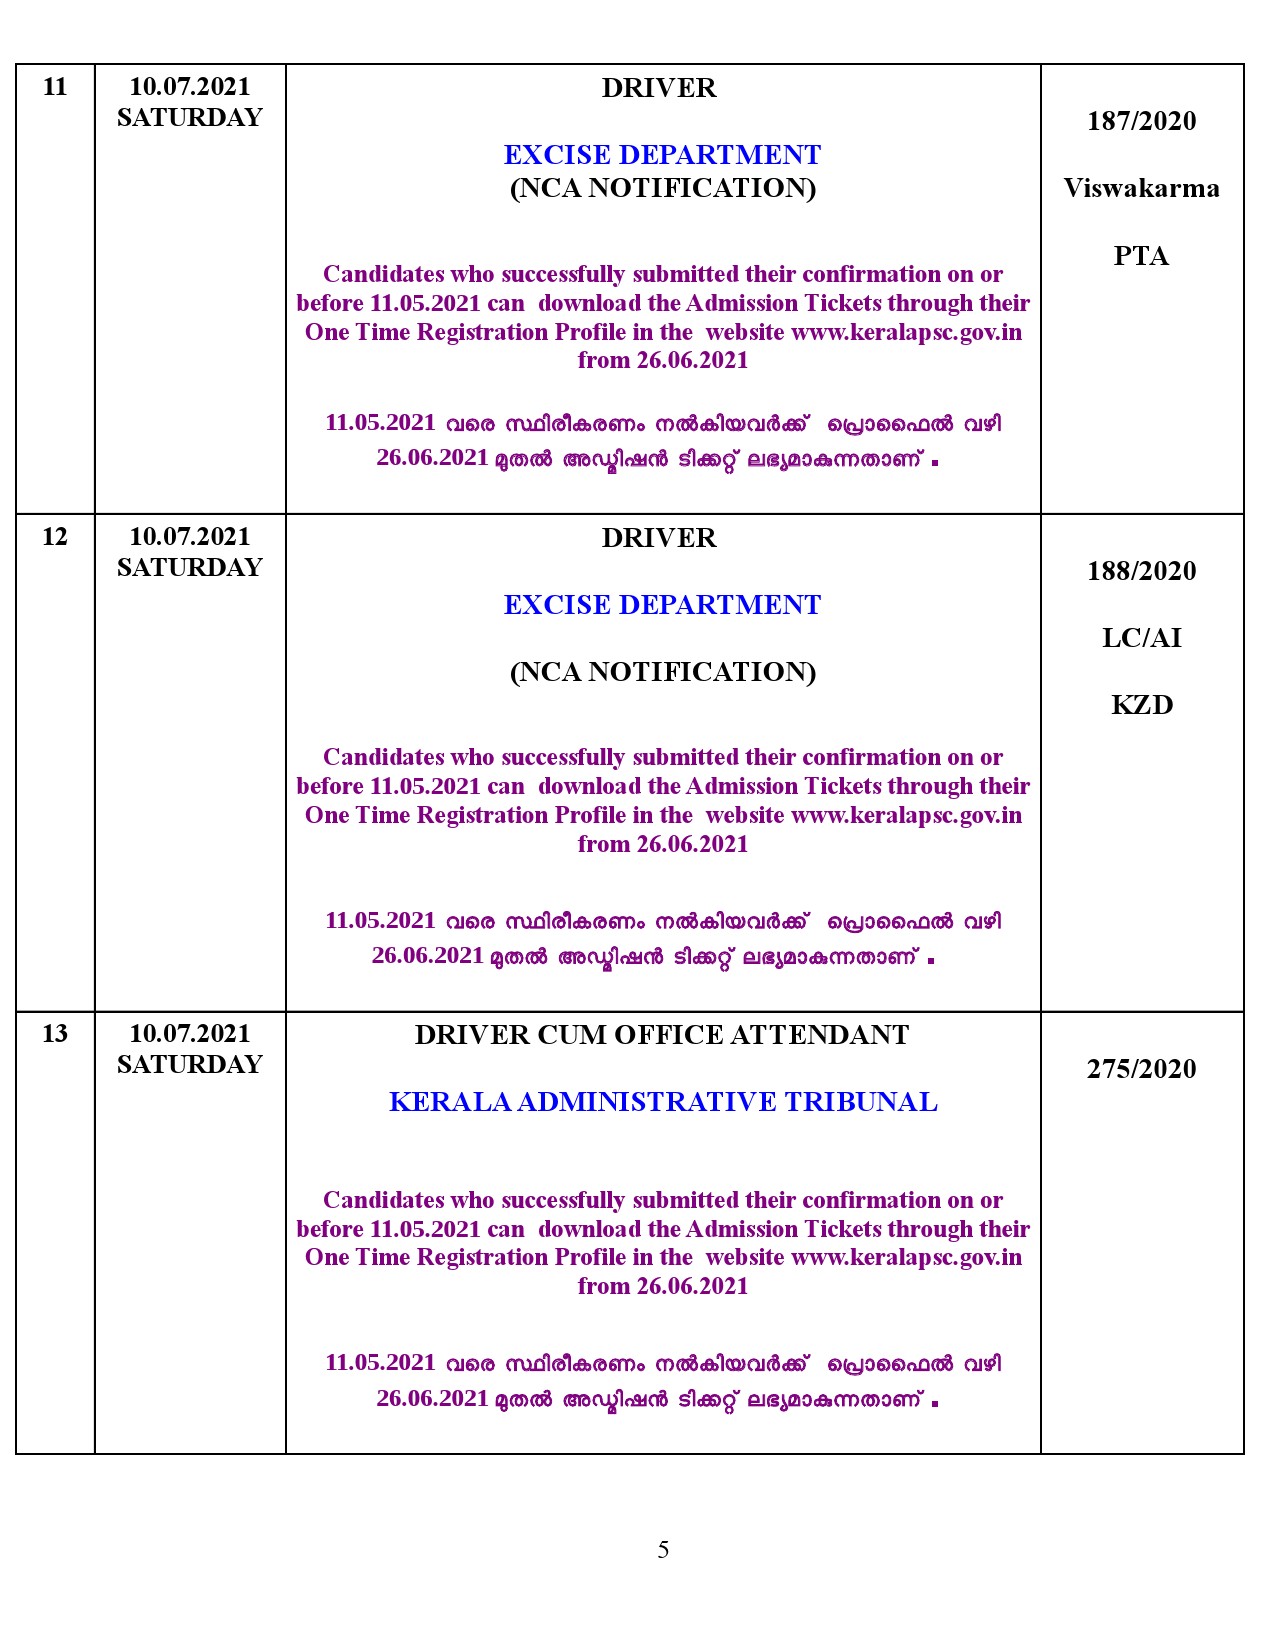 Examination Programme For The Month Of July 2021 - Notification Image 5